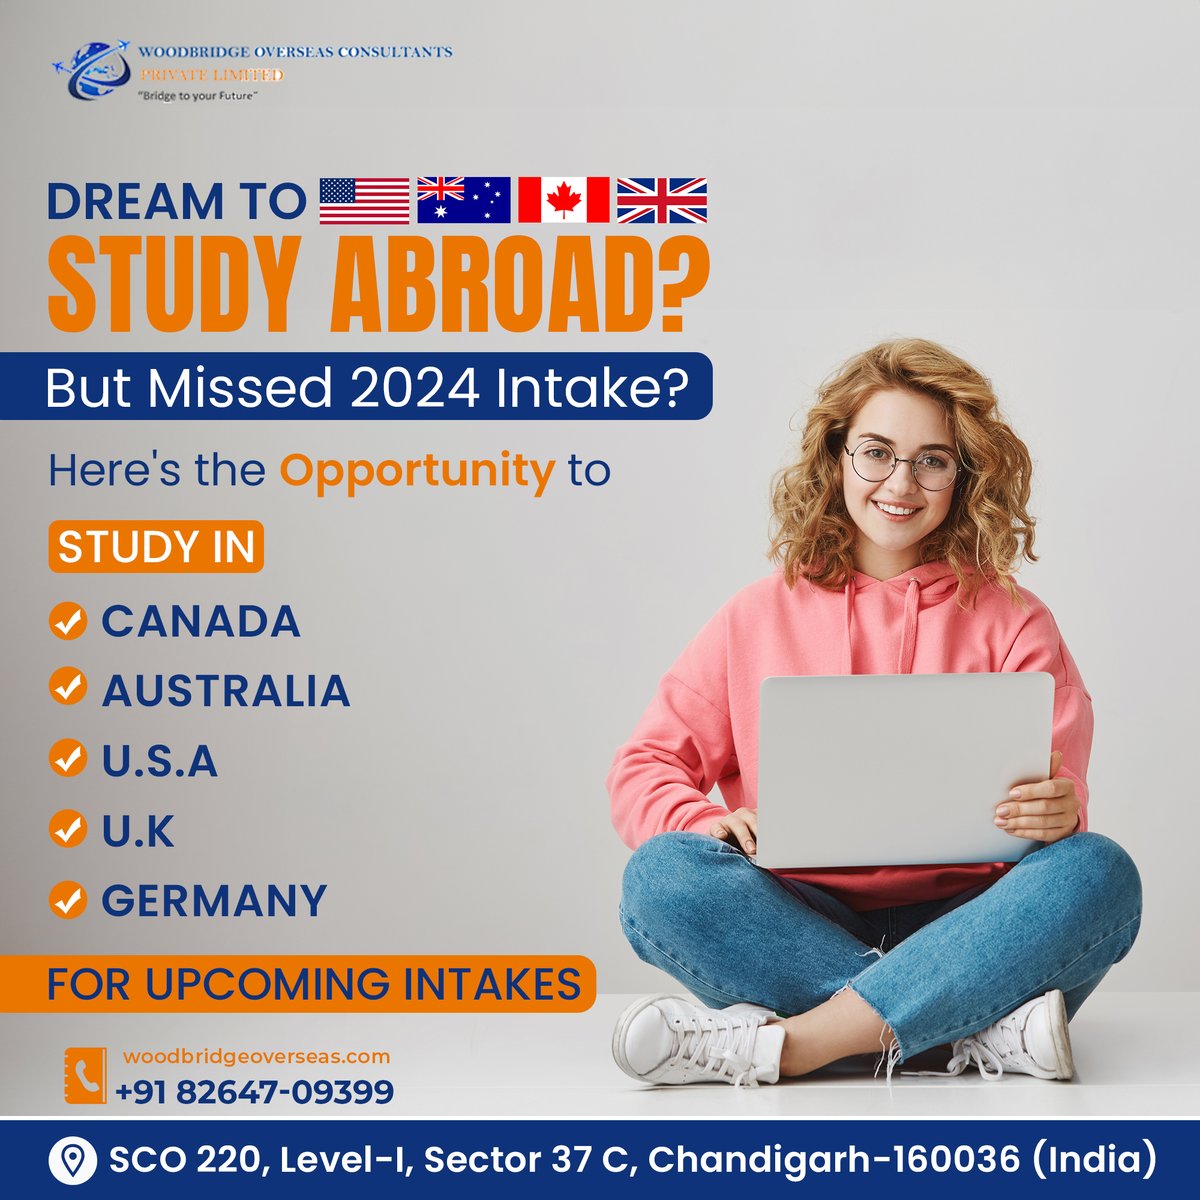 Dreaming of studying abroad? 🌍 Let Woodbridge Overseas Consultants turn your dreams into reality! Reach out today and let's make it happen together!
#StudyAbroad #GlobalLearning #GlobalOpportunities #WoodbridgeOverseasConsultants #ChandigarhVisaConsultants #studyincanada